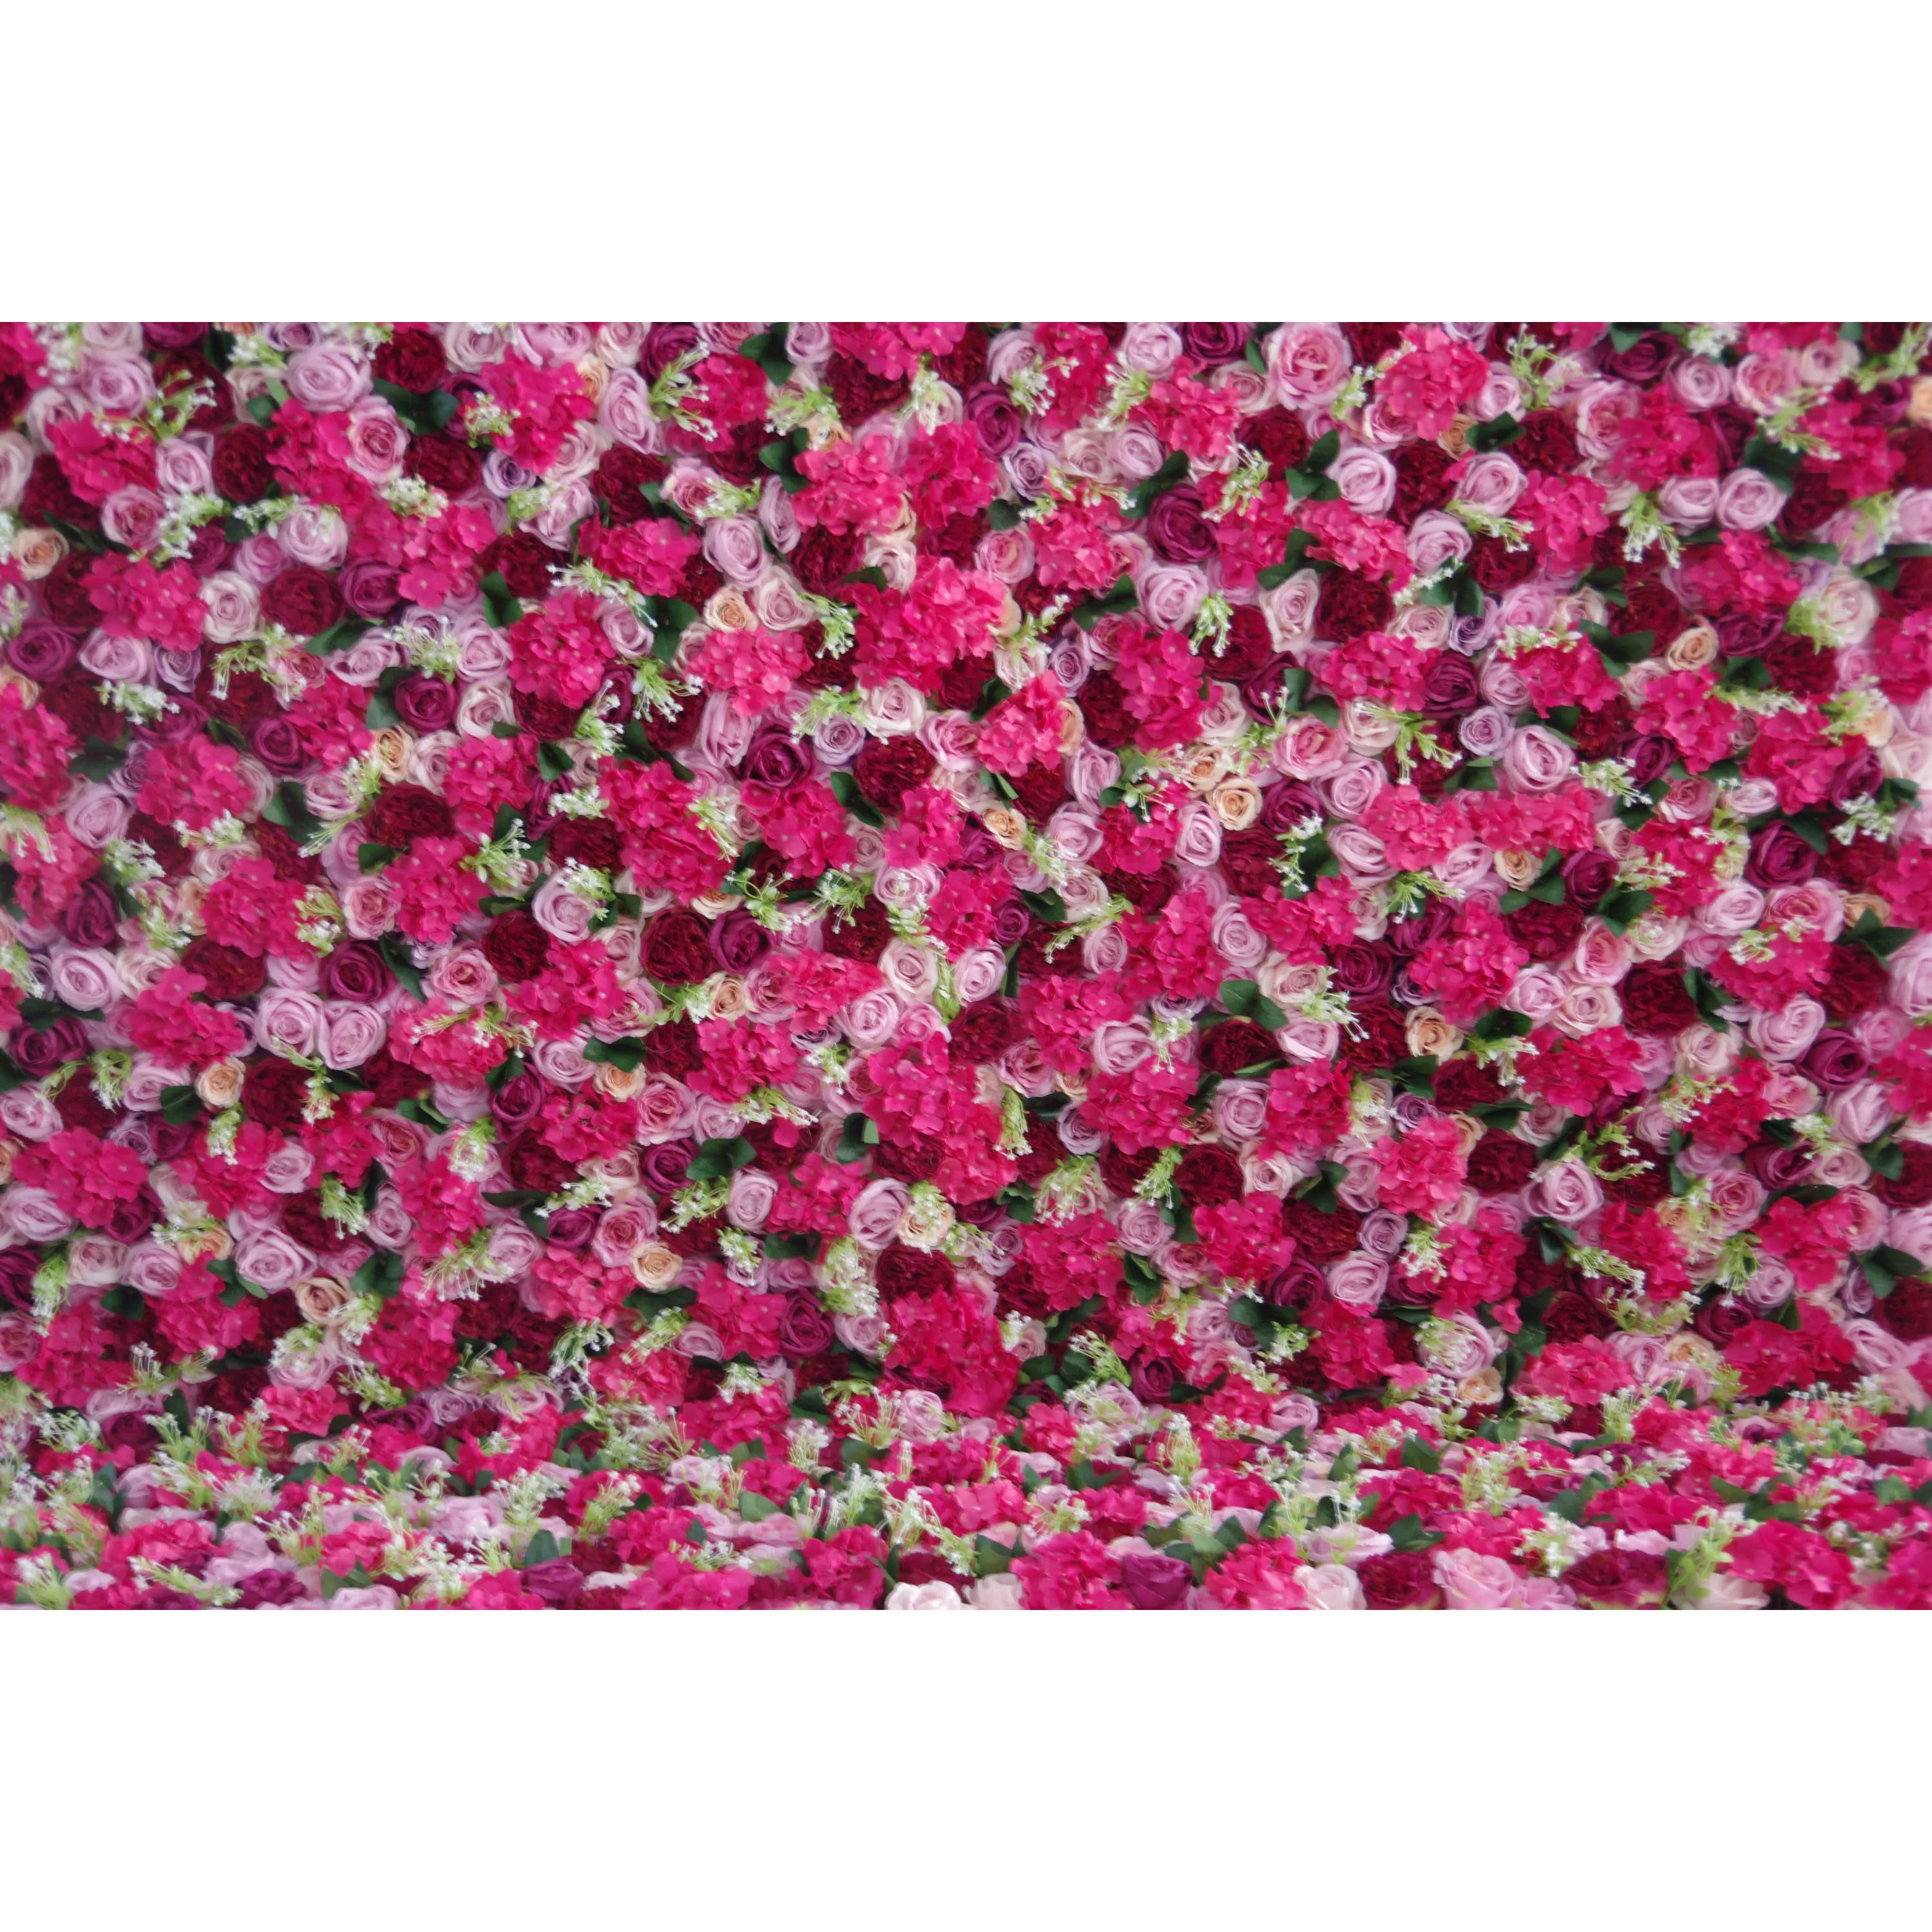 Valar Flowers artificial mixed cerise and dull pink flower wall roll up fabric for weddings and events3